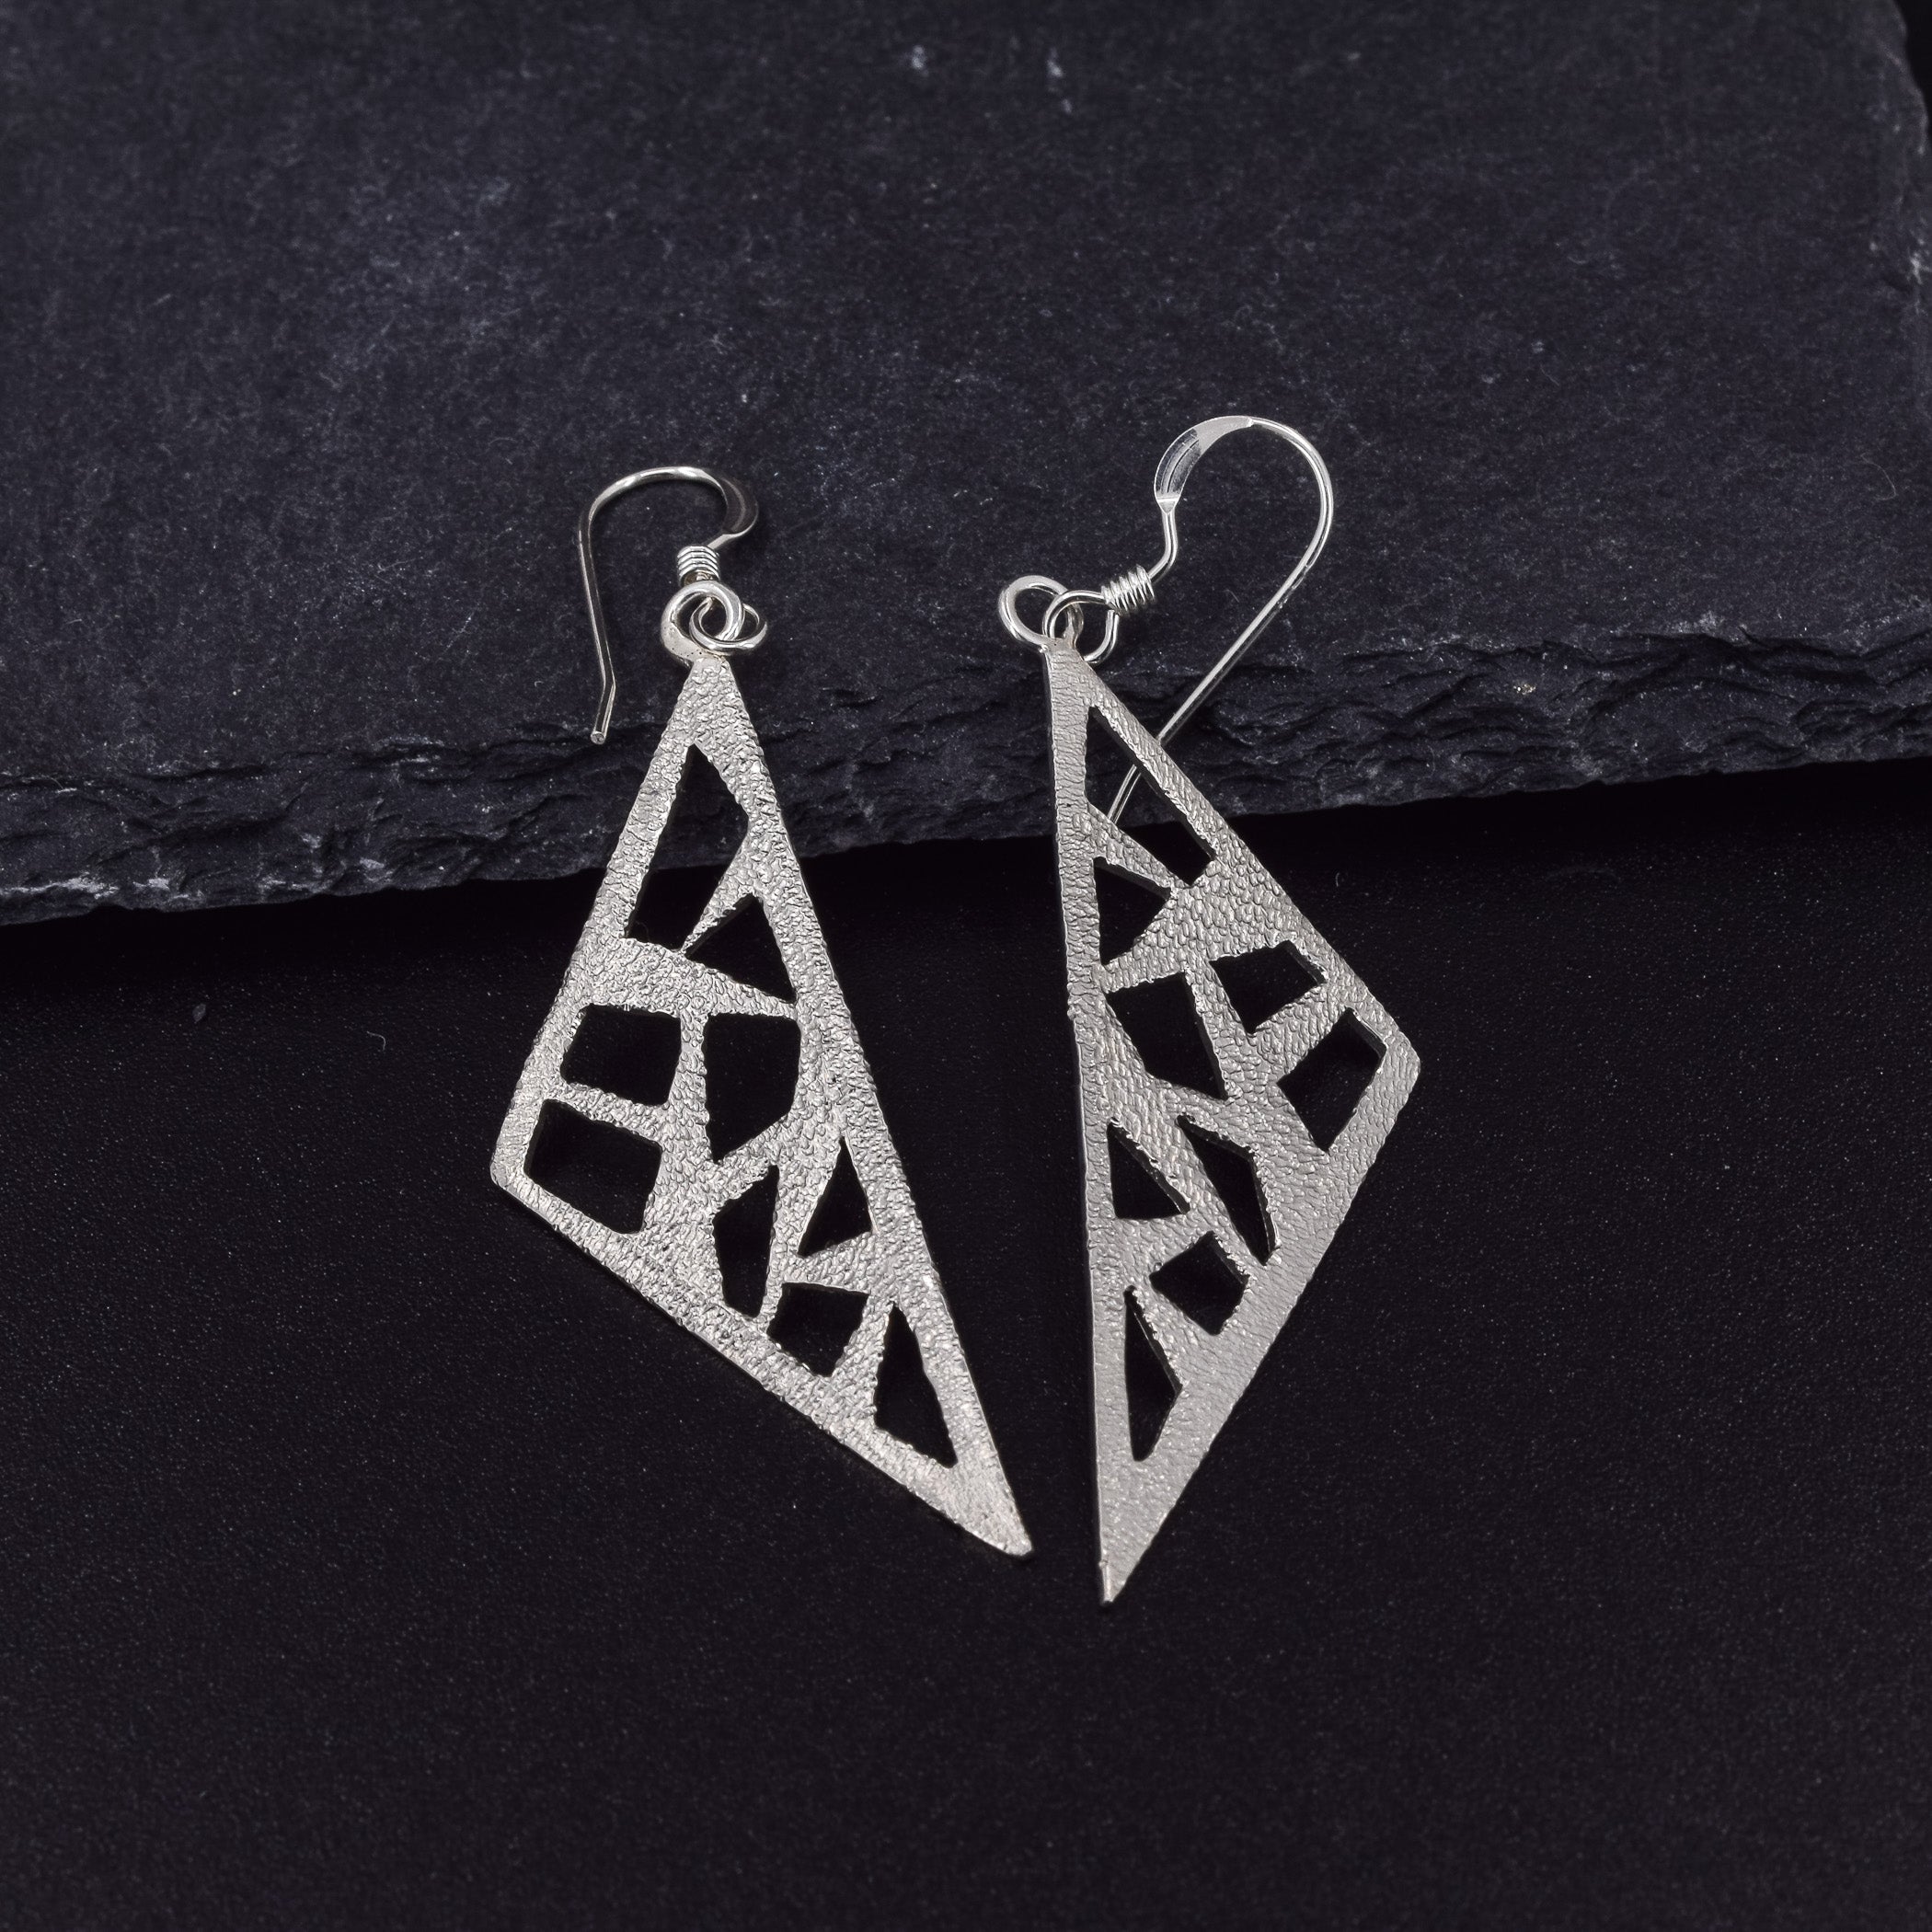 Triangle dangle earrings in sterling silver pierced with a modern design with a textured stardust finish